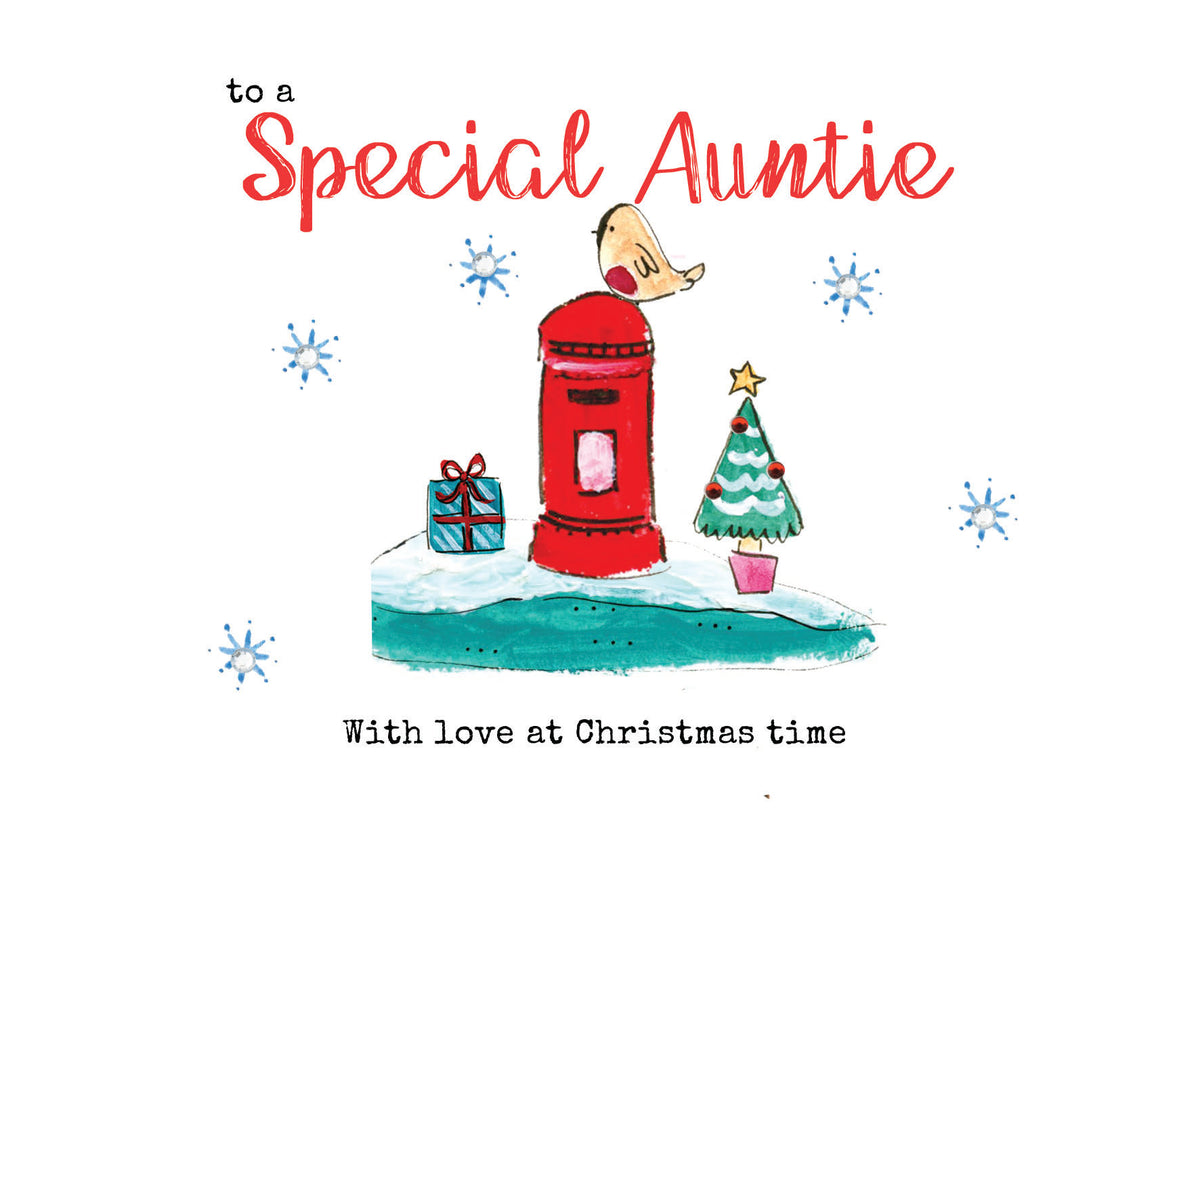 To a Special Auntie Robin Pillar Box Christmas Card